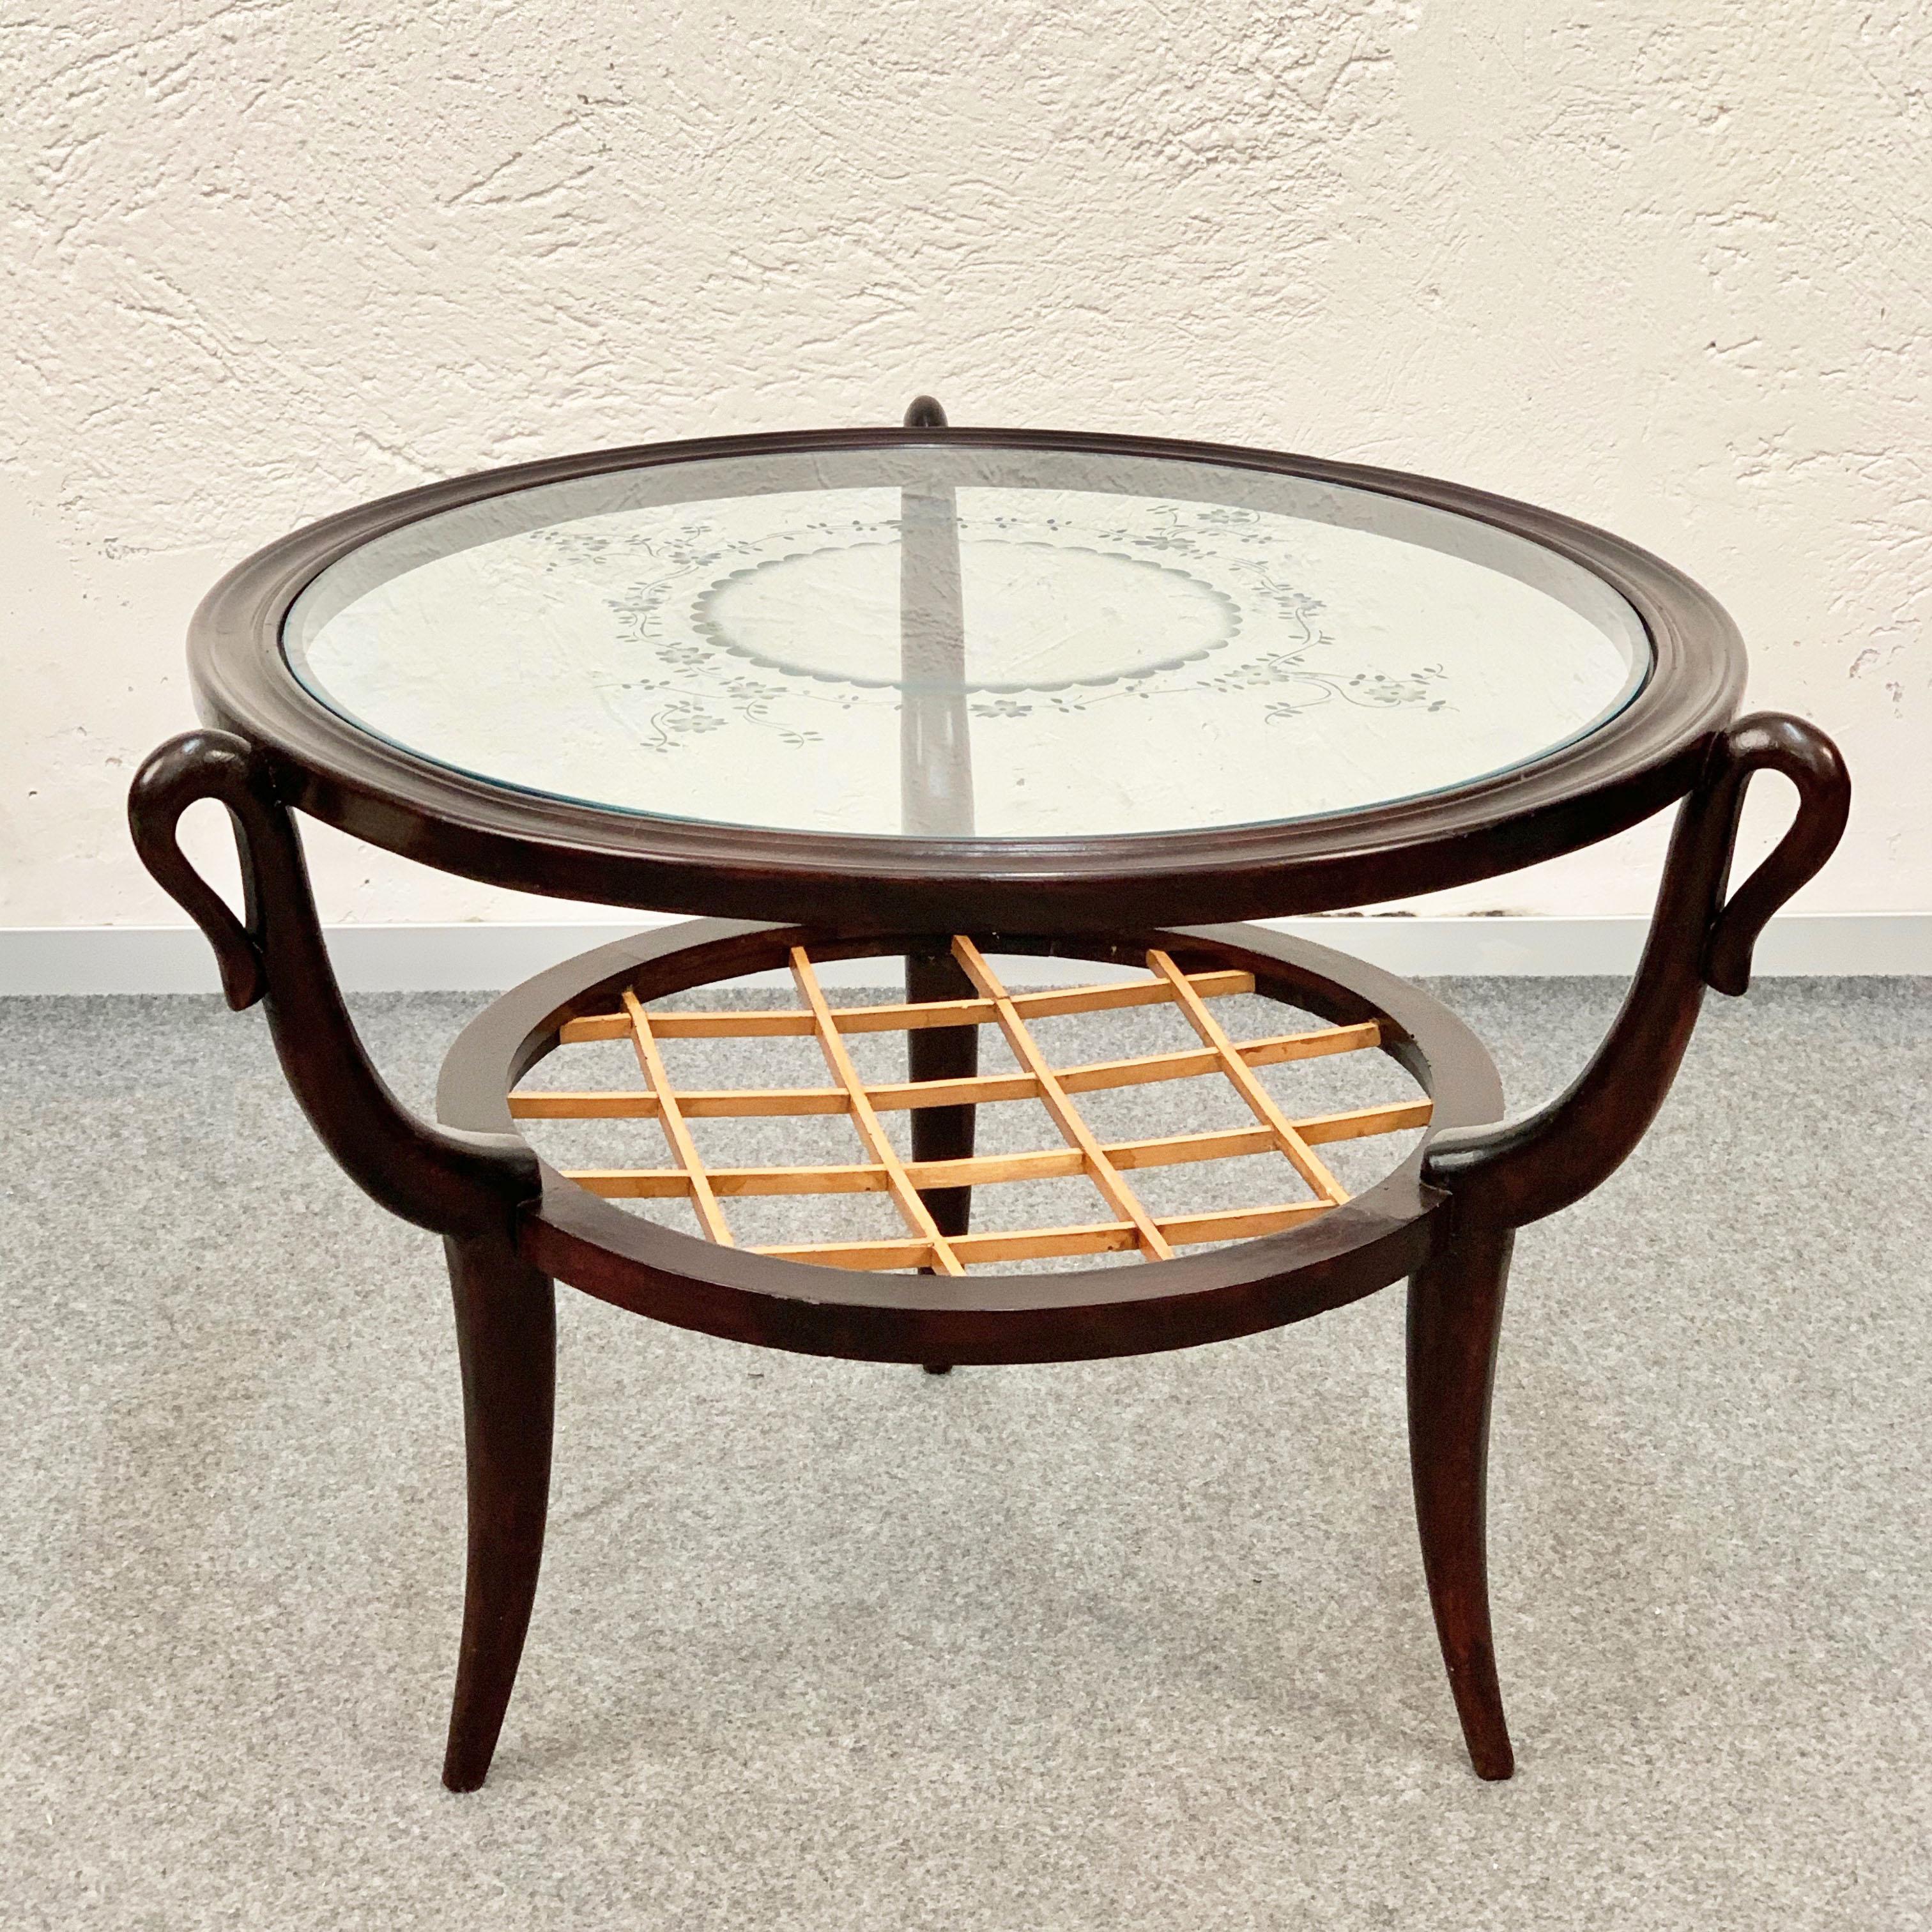 Two-level engraved wood and glass coffee table, it was designed in Italy during the 1950s in the style of Gio Ponti.

It is made of a circular grooved wooden top that supports the frosted glass top with floral motifs. 

The second shelf is made of a